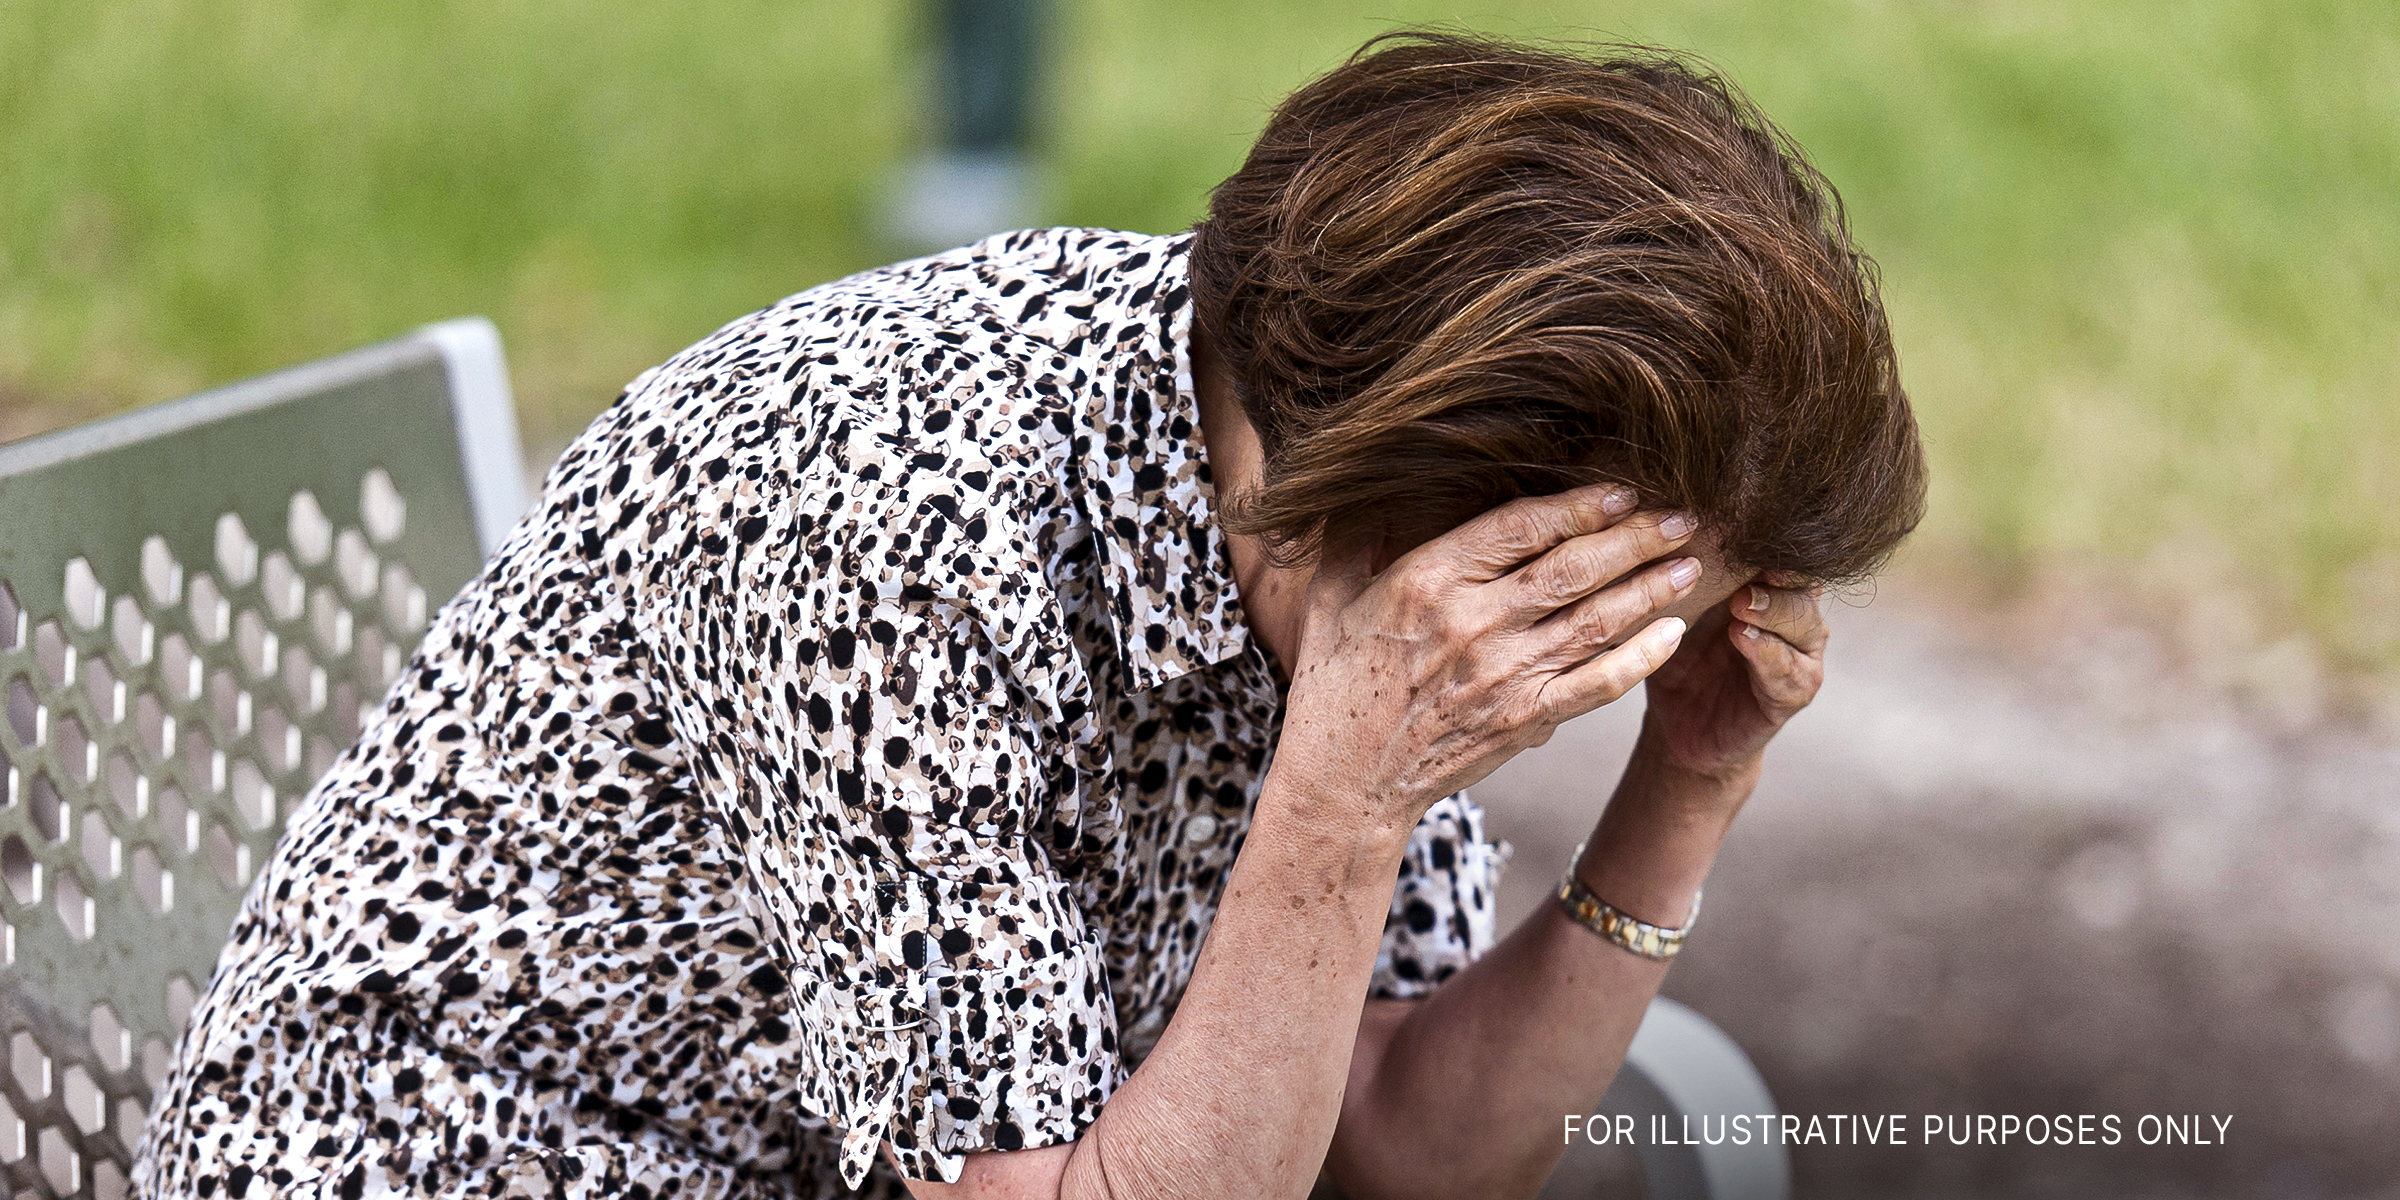 An upset woman | Source: Getty Images